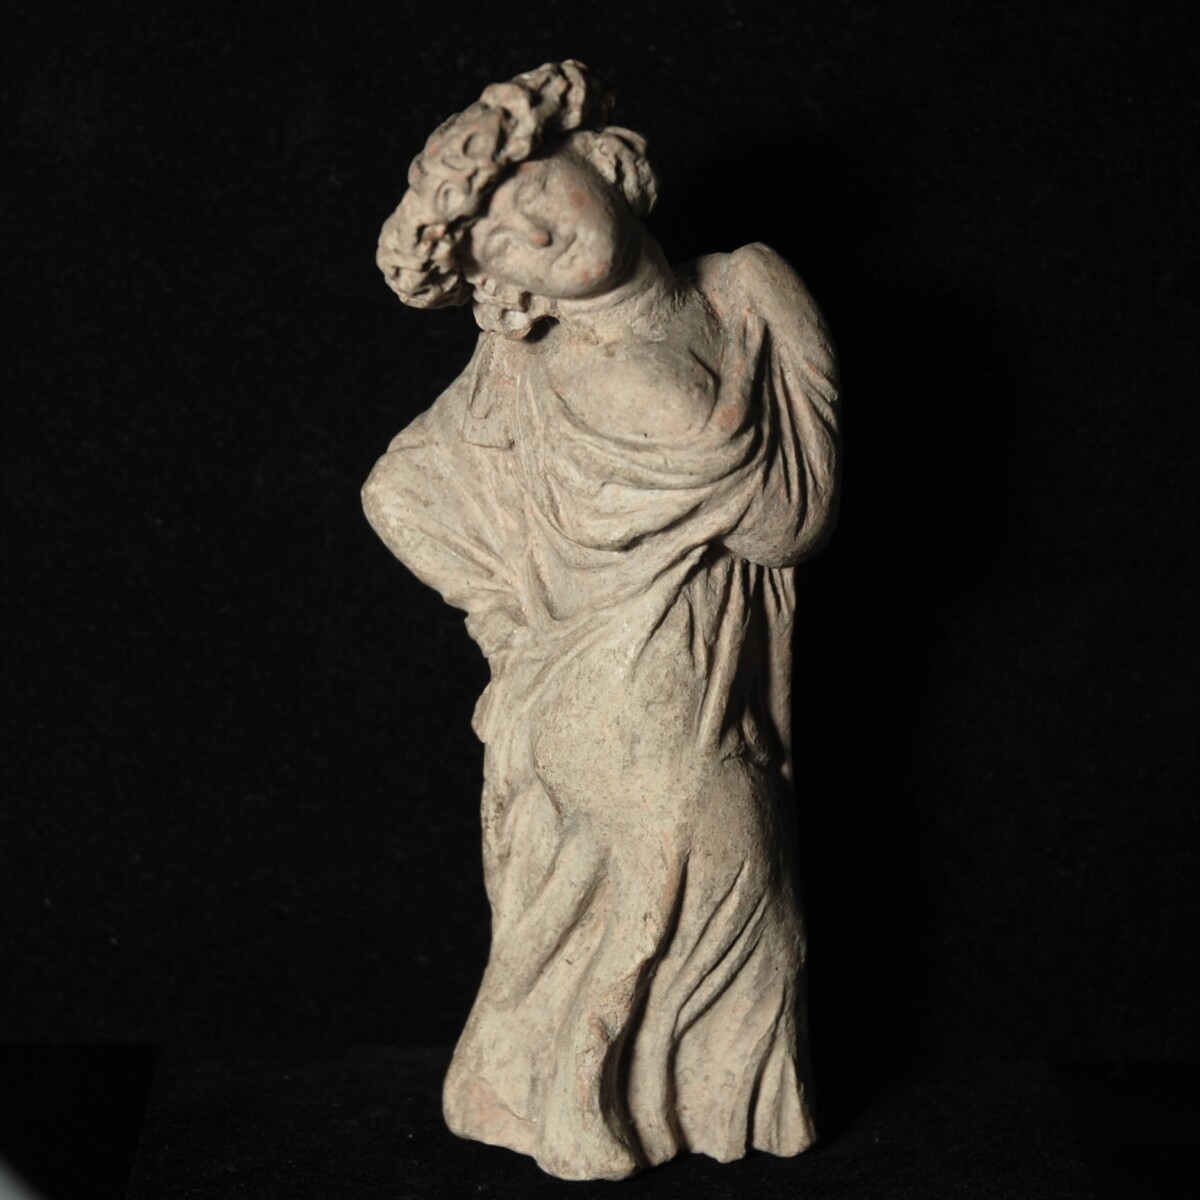 1 Tanagra statuette of a dancing girl